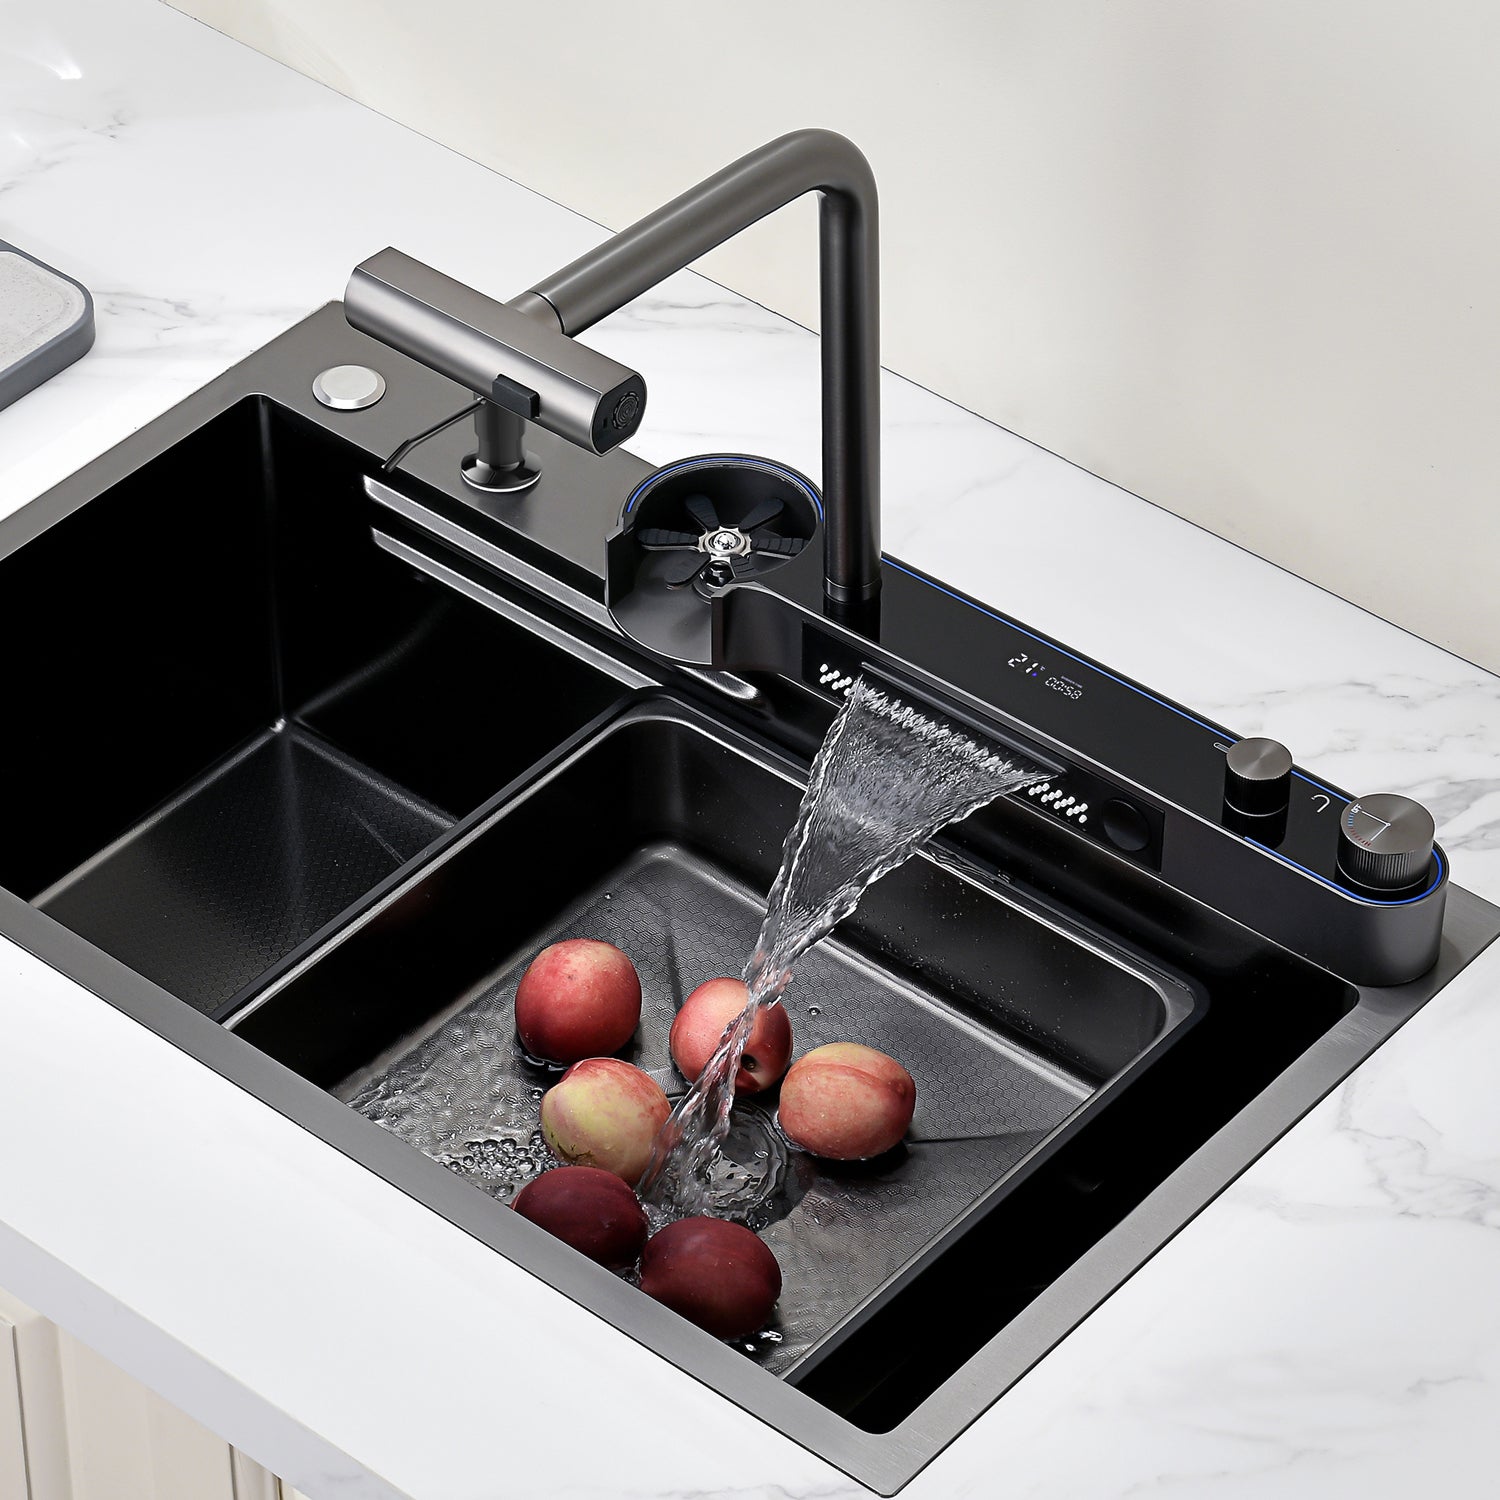 Lefton Two Outlets Waterfall Faucet Kitchen Sink with Digital Temperature Display & LED Lighting-KS2208 -Kitchen Sinks